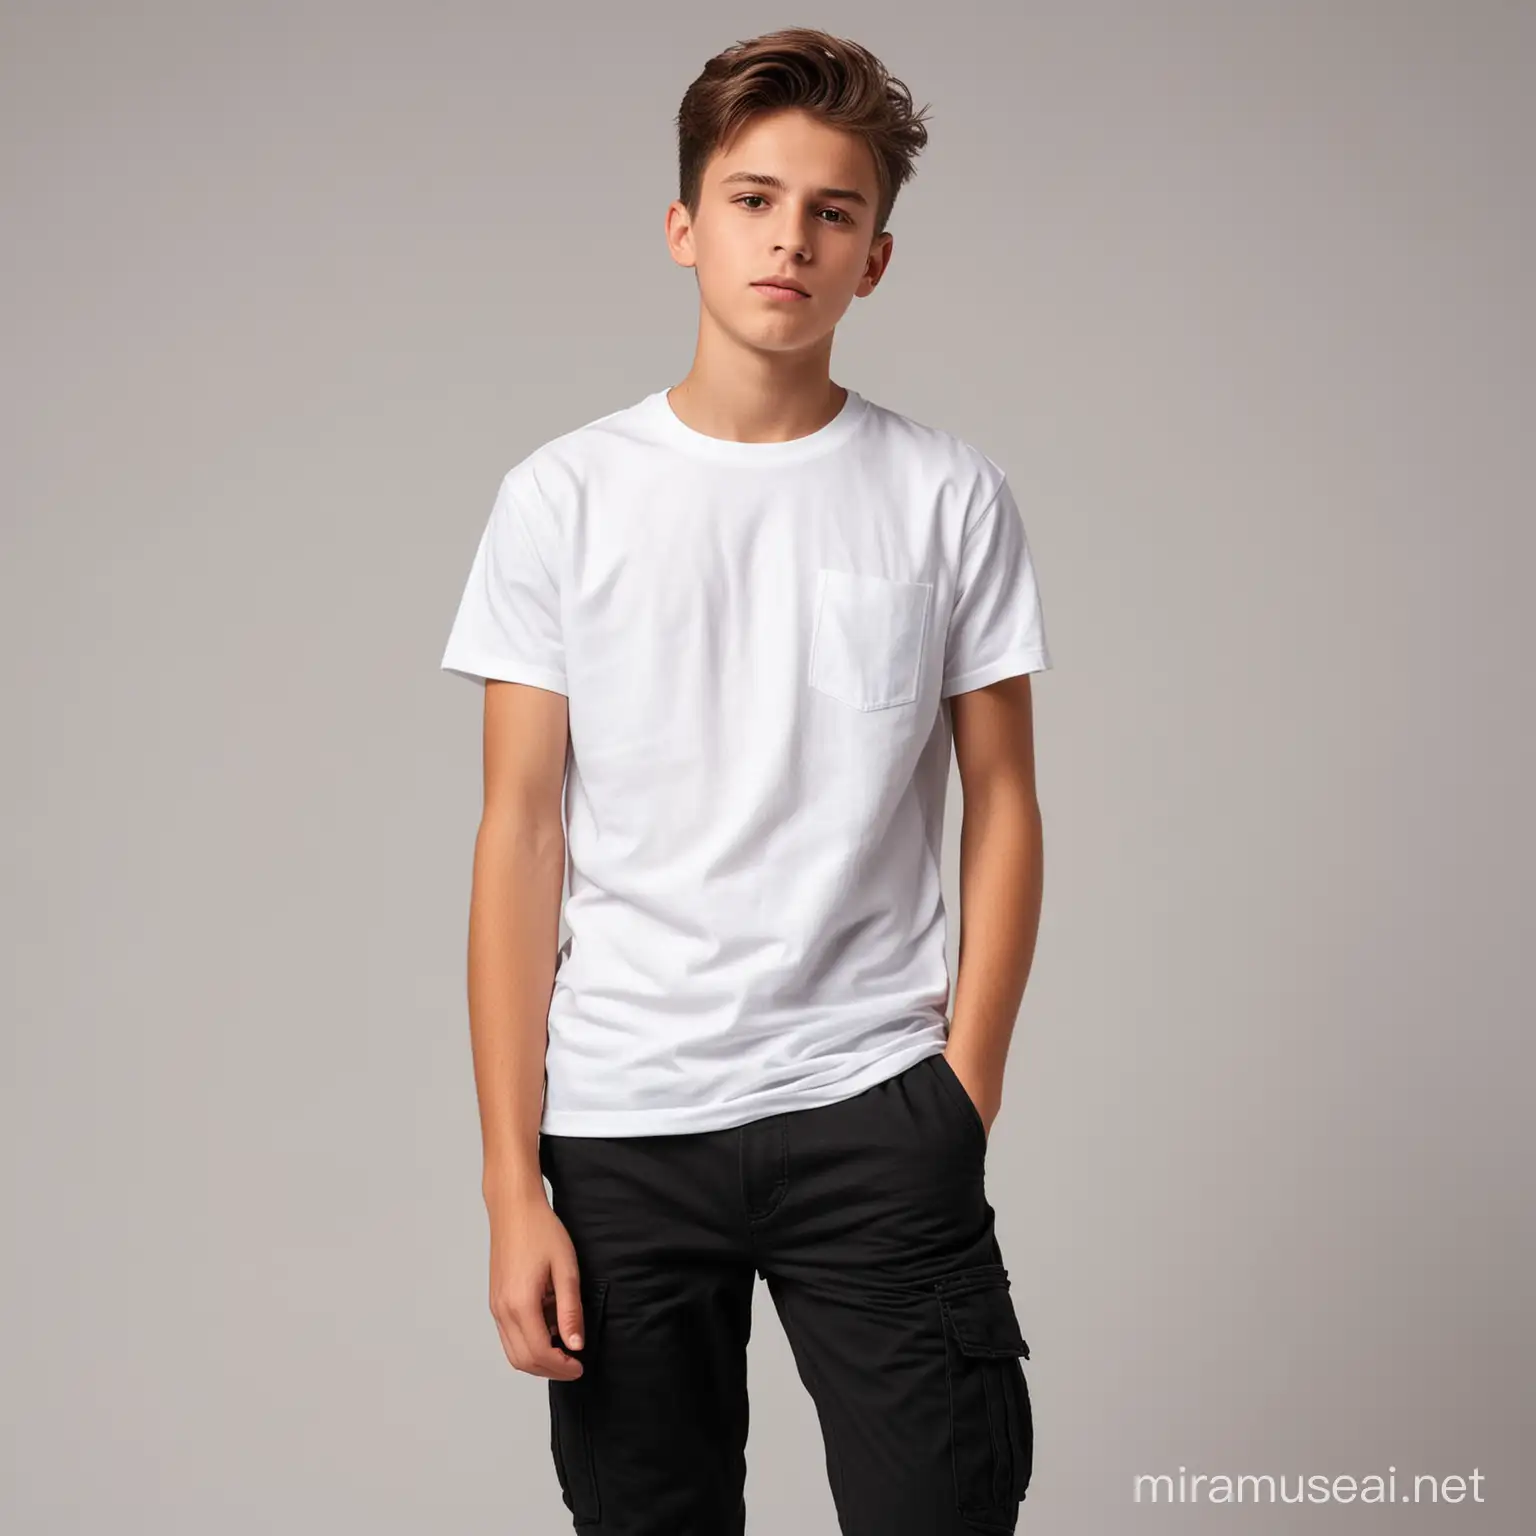 Teenager Boy in Classic TShirt and Cargo Pants on White Background